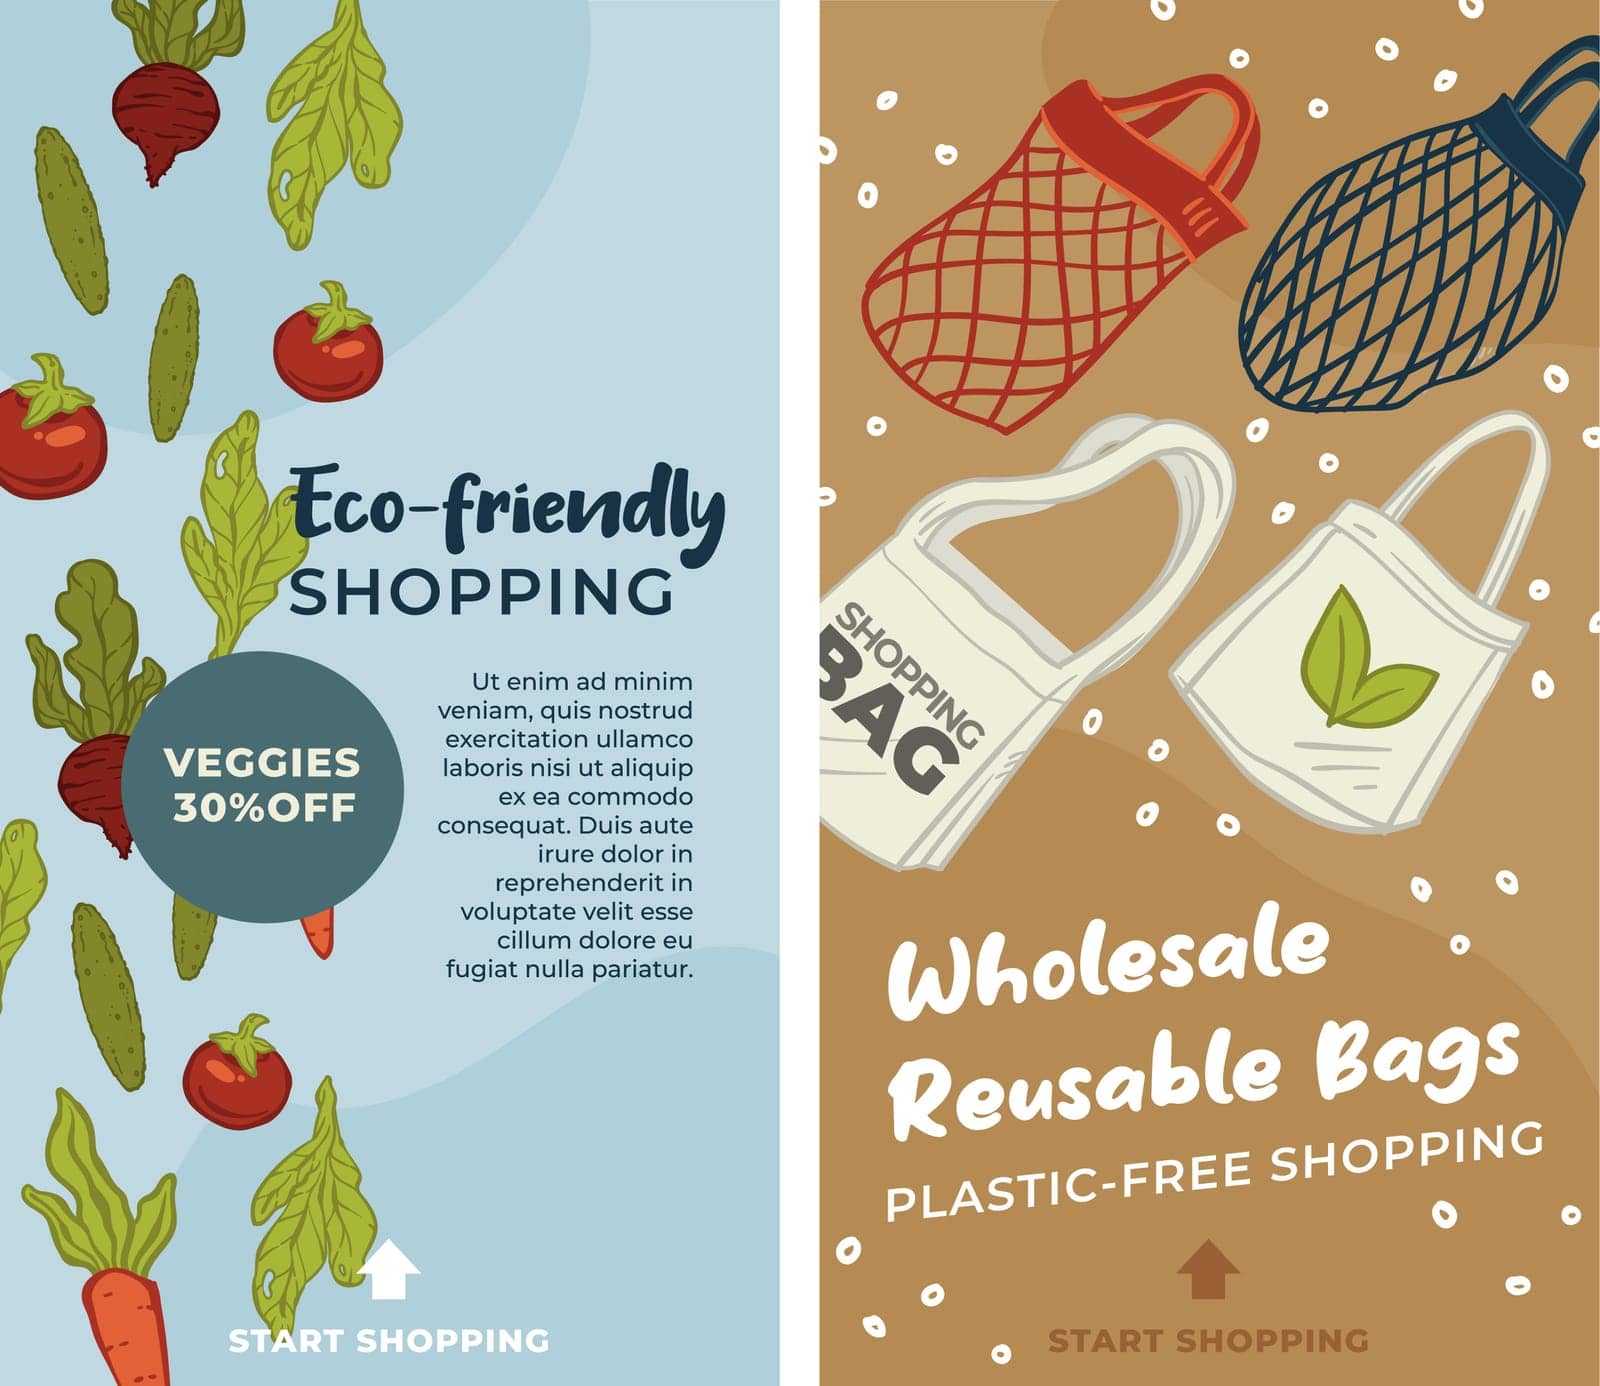 Wholesale shopping, plastic free products for home and everyday lifestyle. Reusable bags, eco friendly assortment of ingredients, veggies and fruits for dieting and eating. Vector in flat style